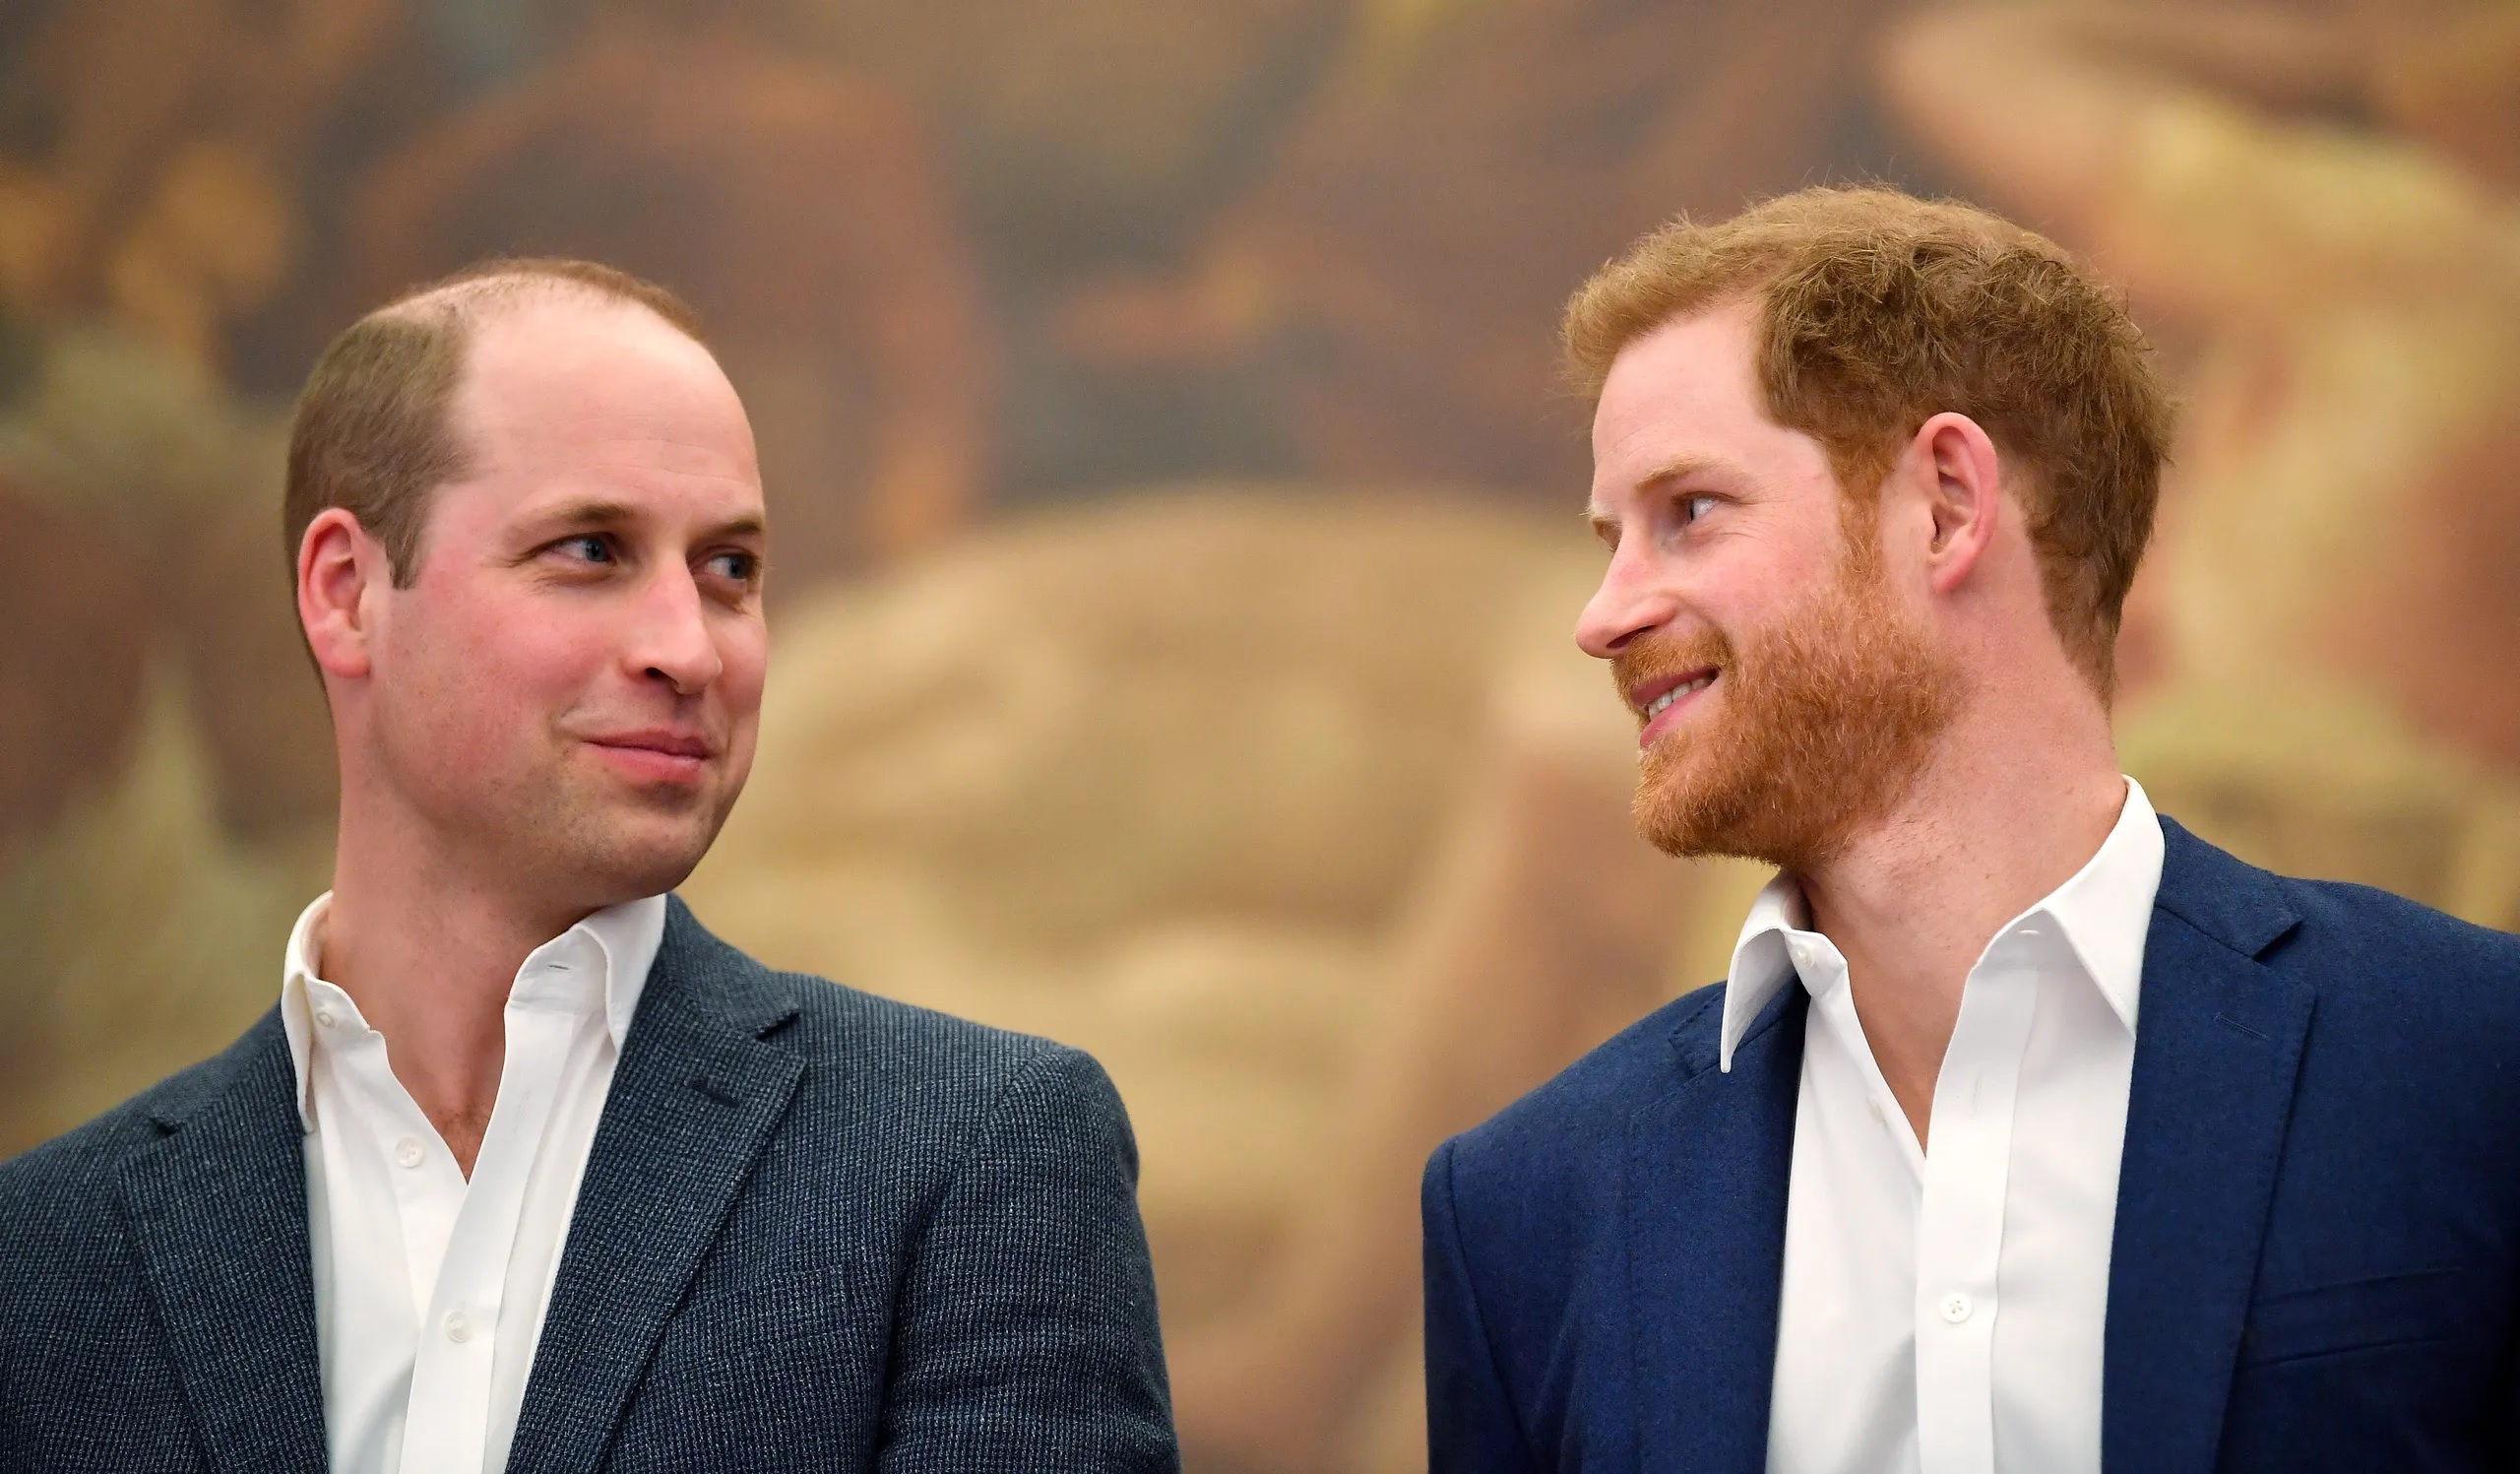 This is what Prince William needs to do to prince Harry to show he's a 'leader', says royal expert